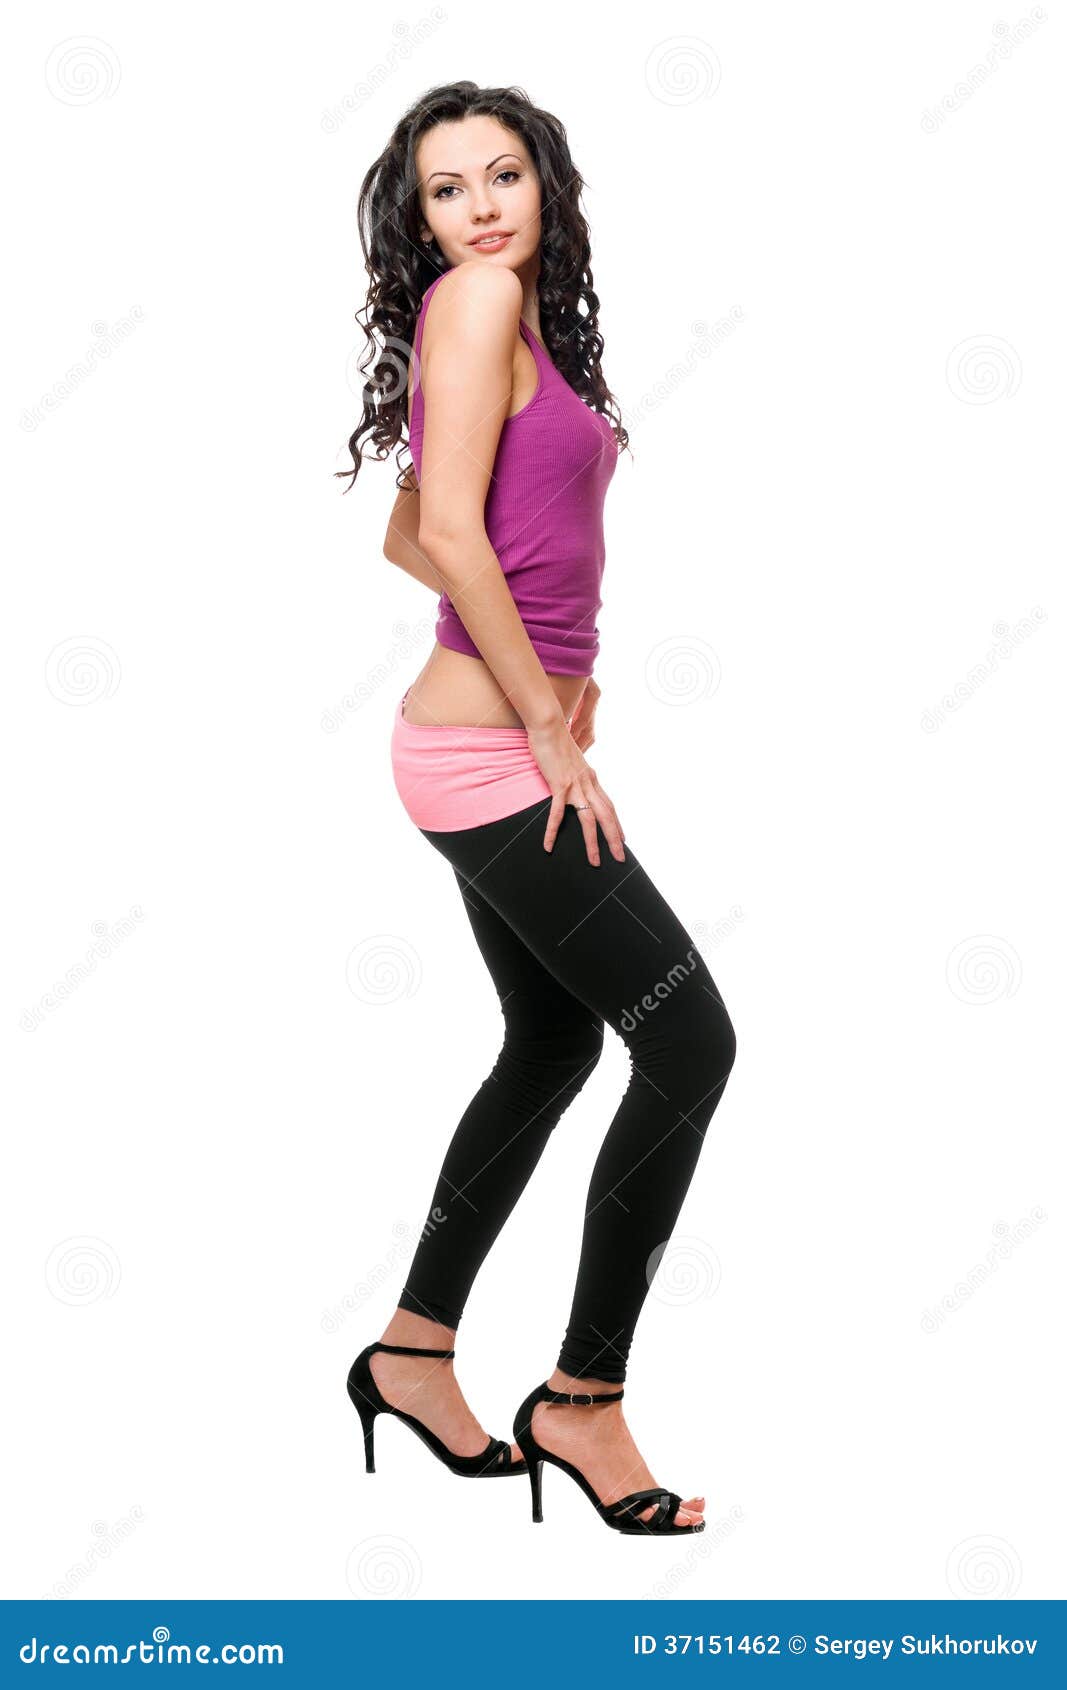 Lovely Young Brunette in a Black Leggings Stock Photo - Image of ...